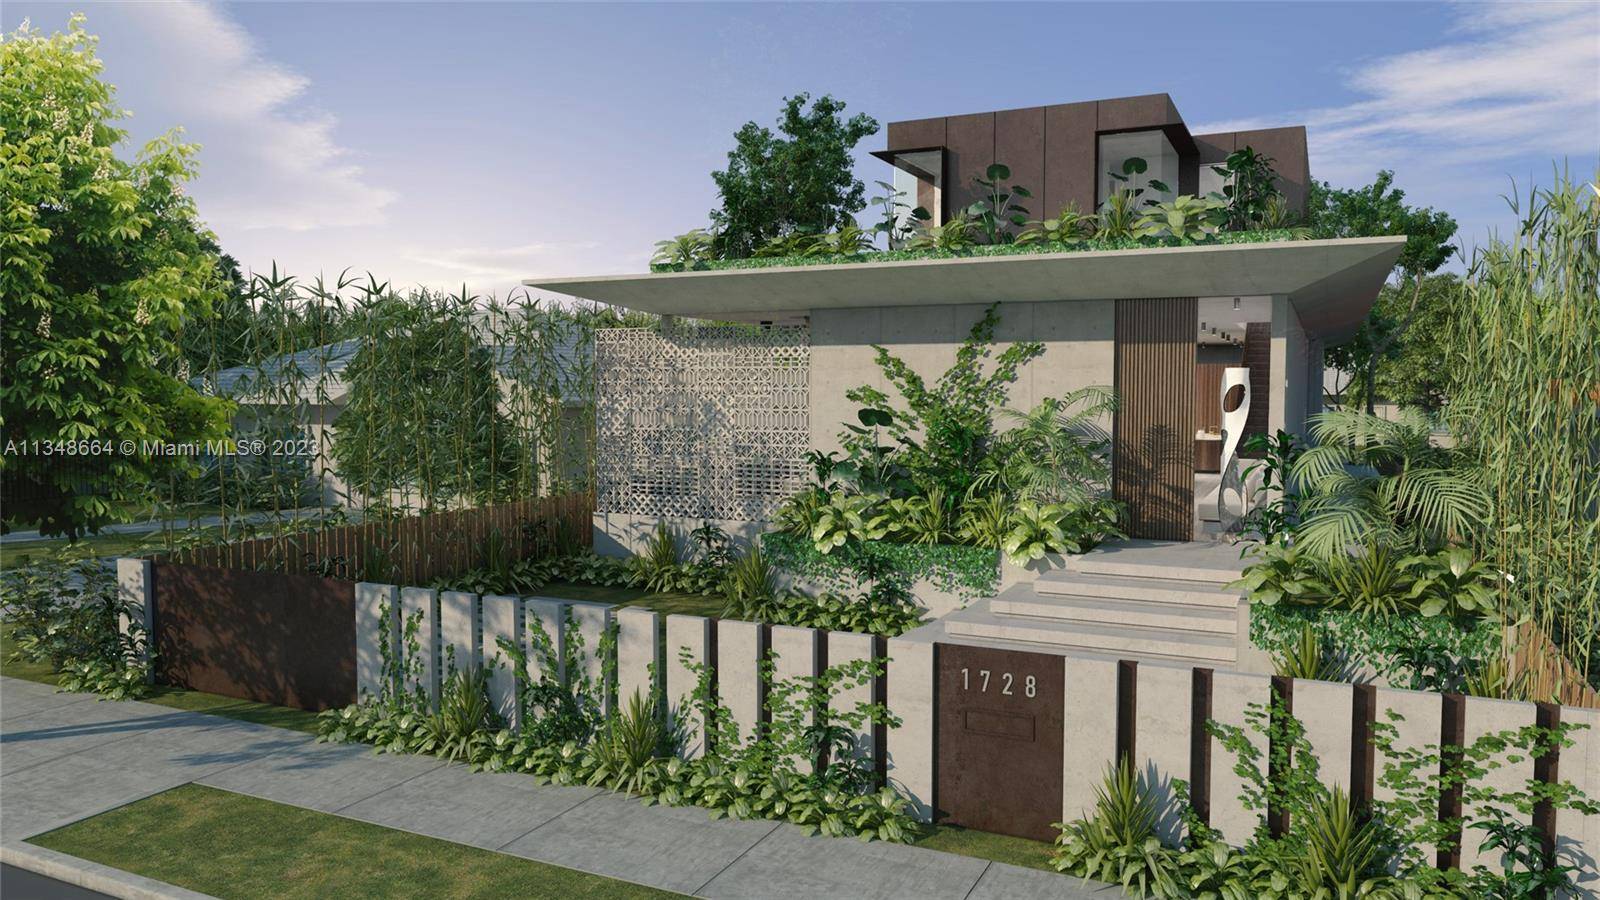 Brand new construction. This is a magnificent opportunity in the Palm View enclave to own a luxe residence with a genuine Miami Beach lifestyle.